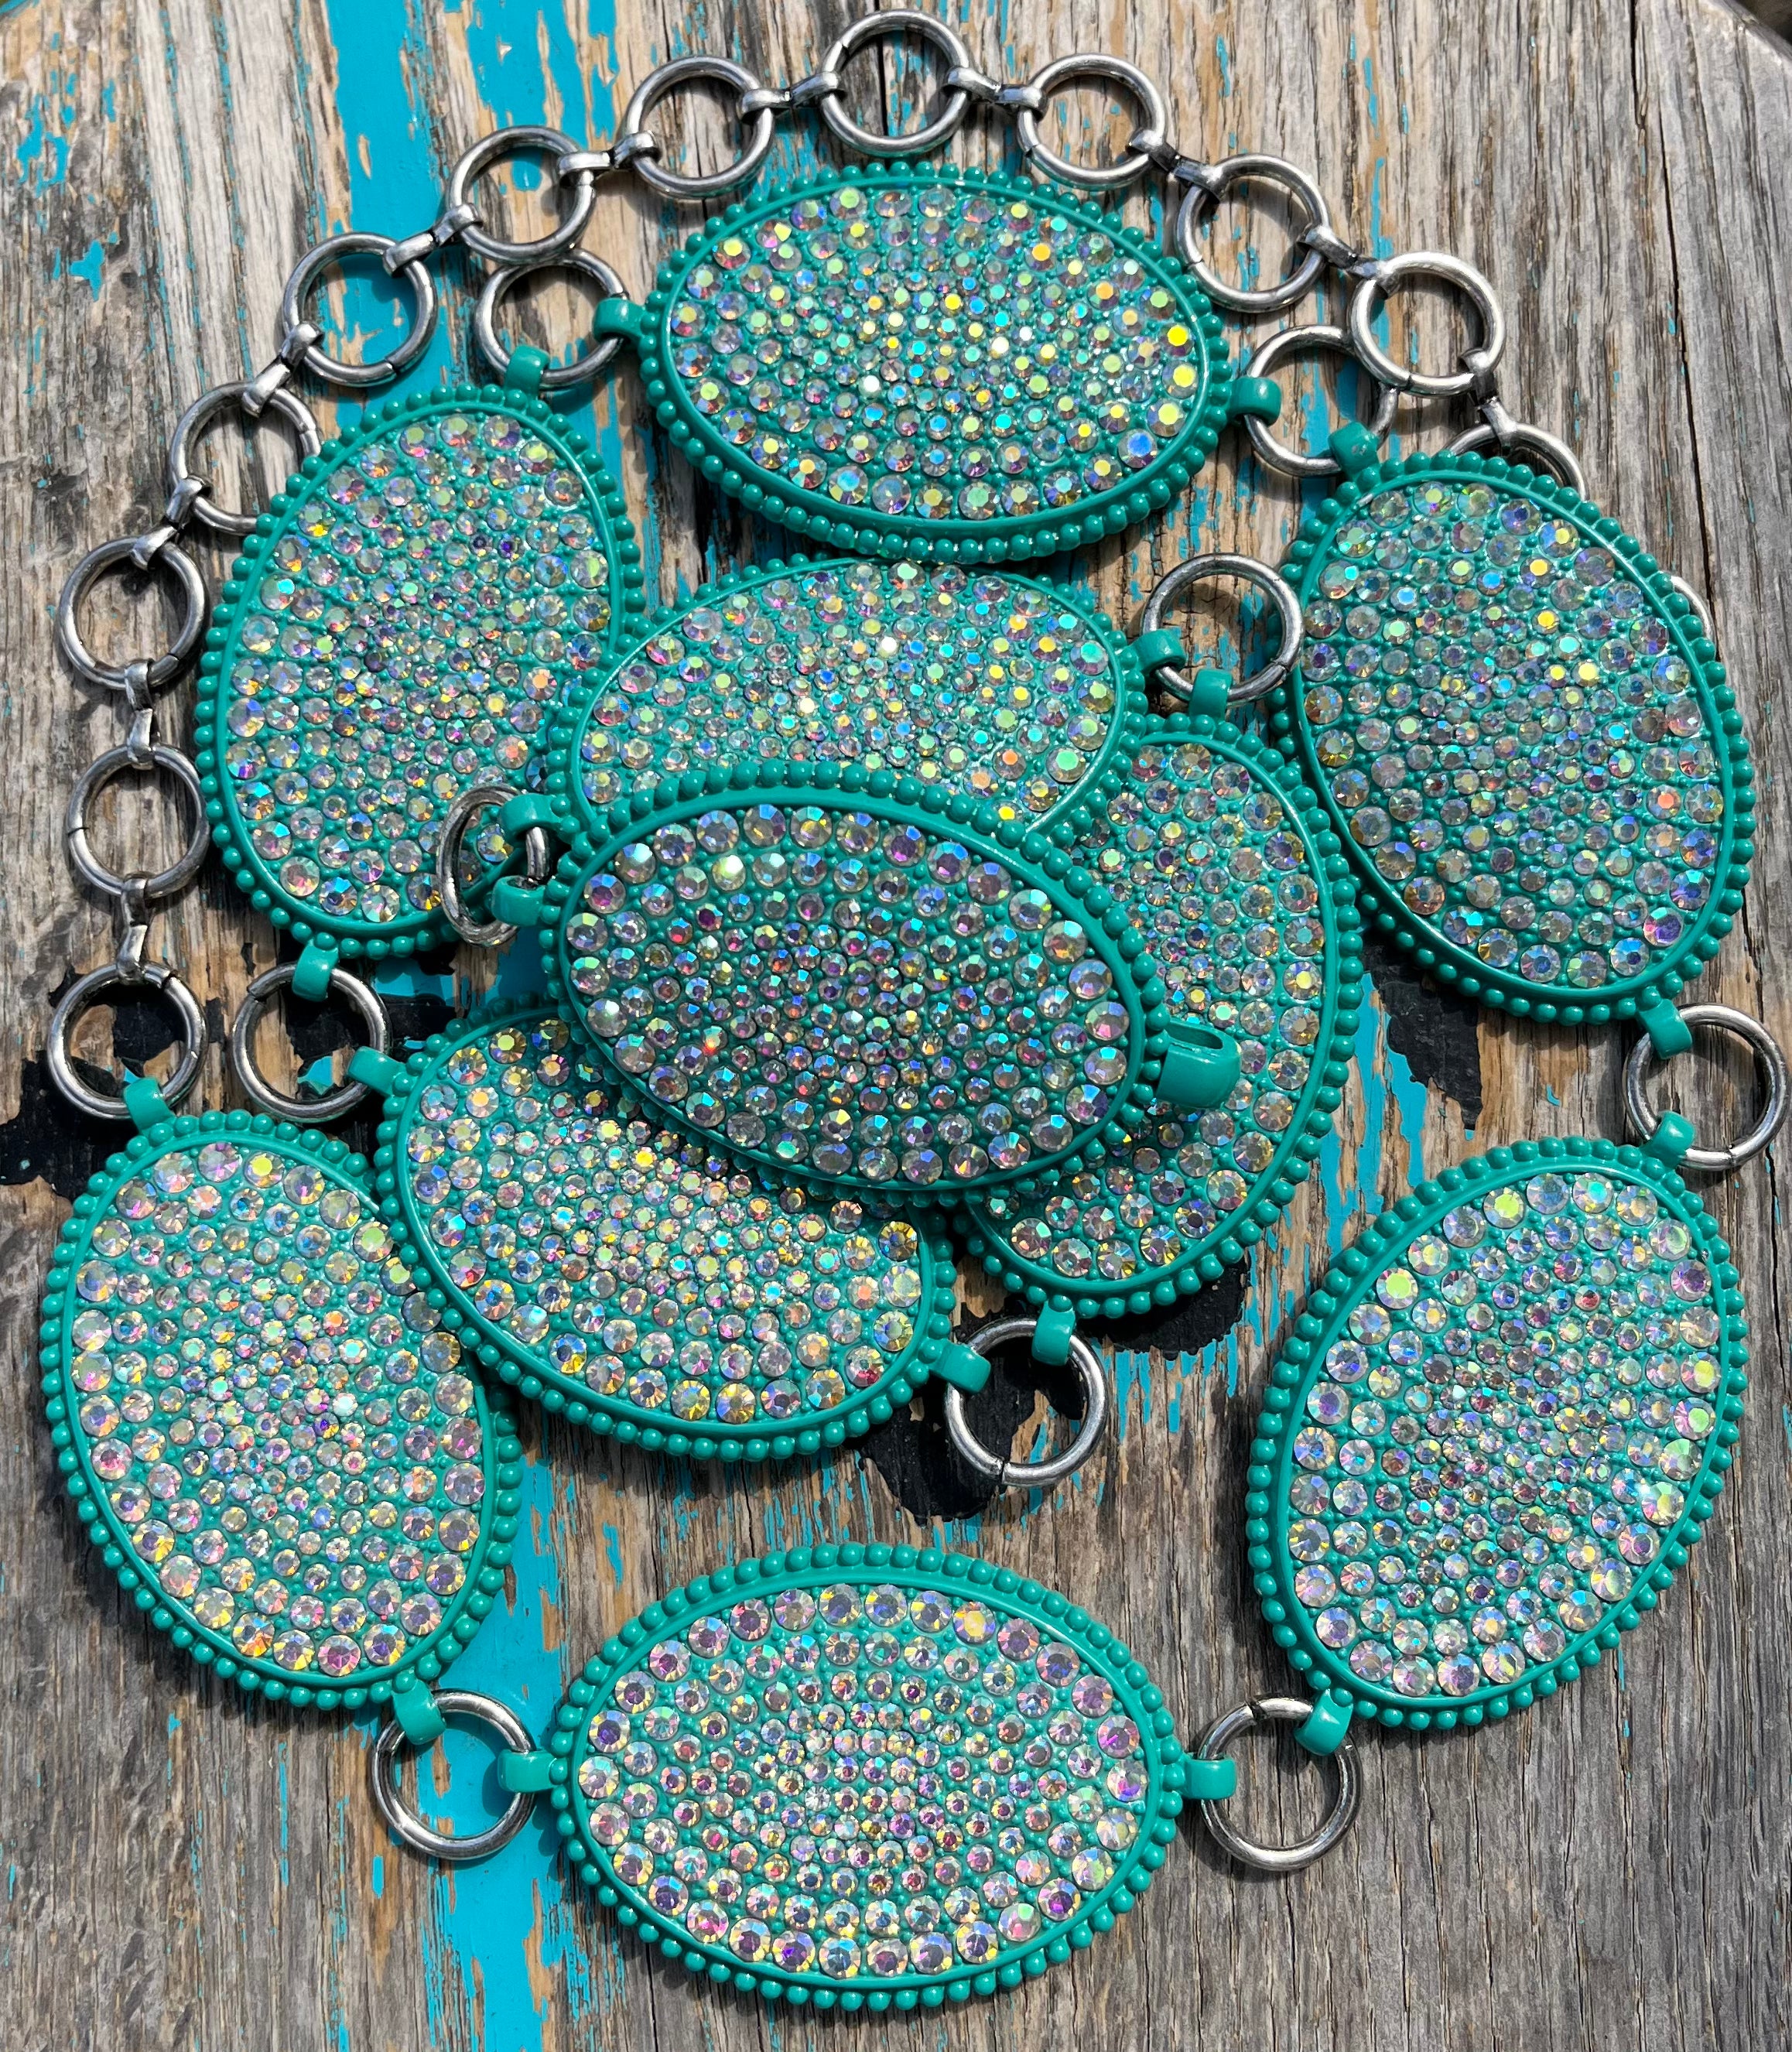 Turquoise Oval Concho w/ Iridescent Crystals Ladies Belt